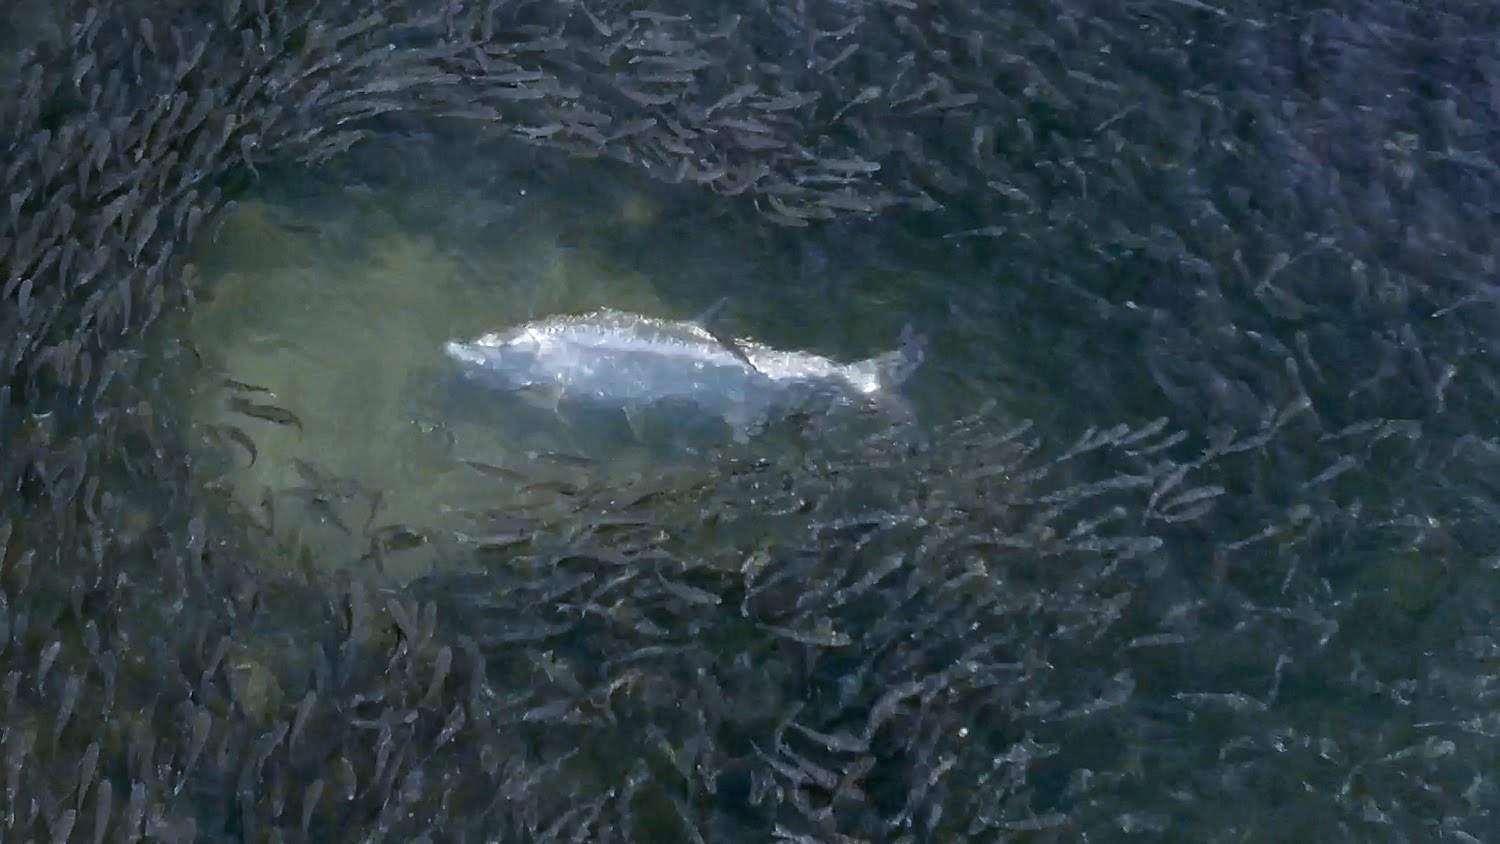 Epic Drone Footage of the Florida Mullet Run Moldy Chum